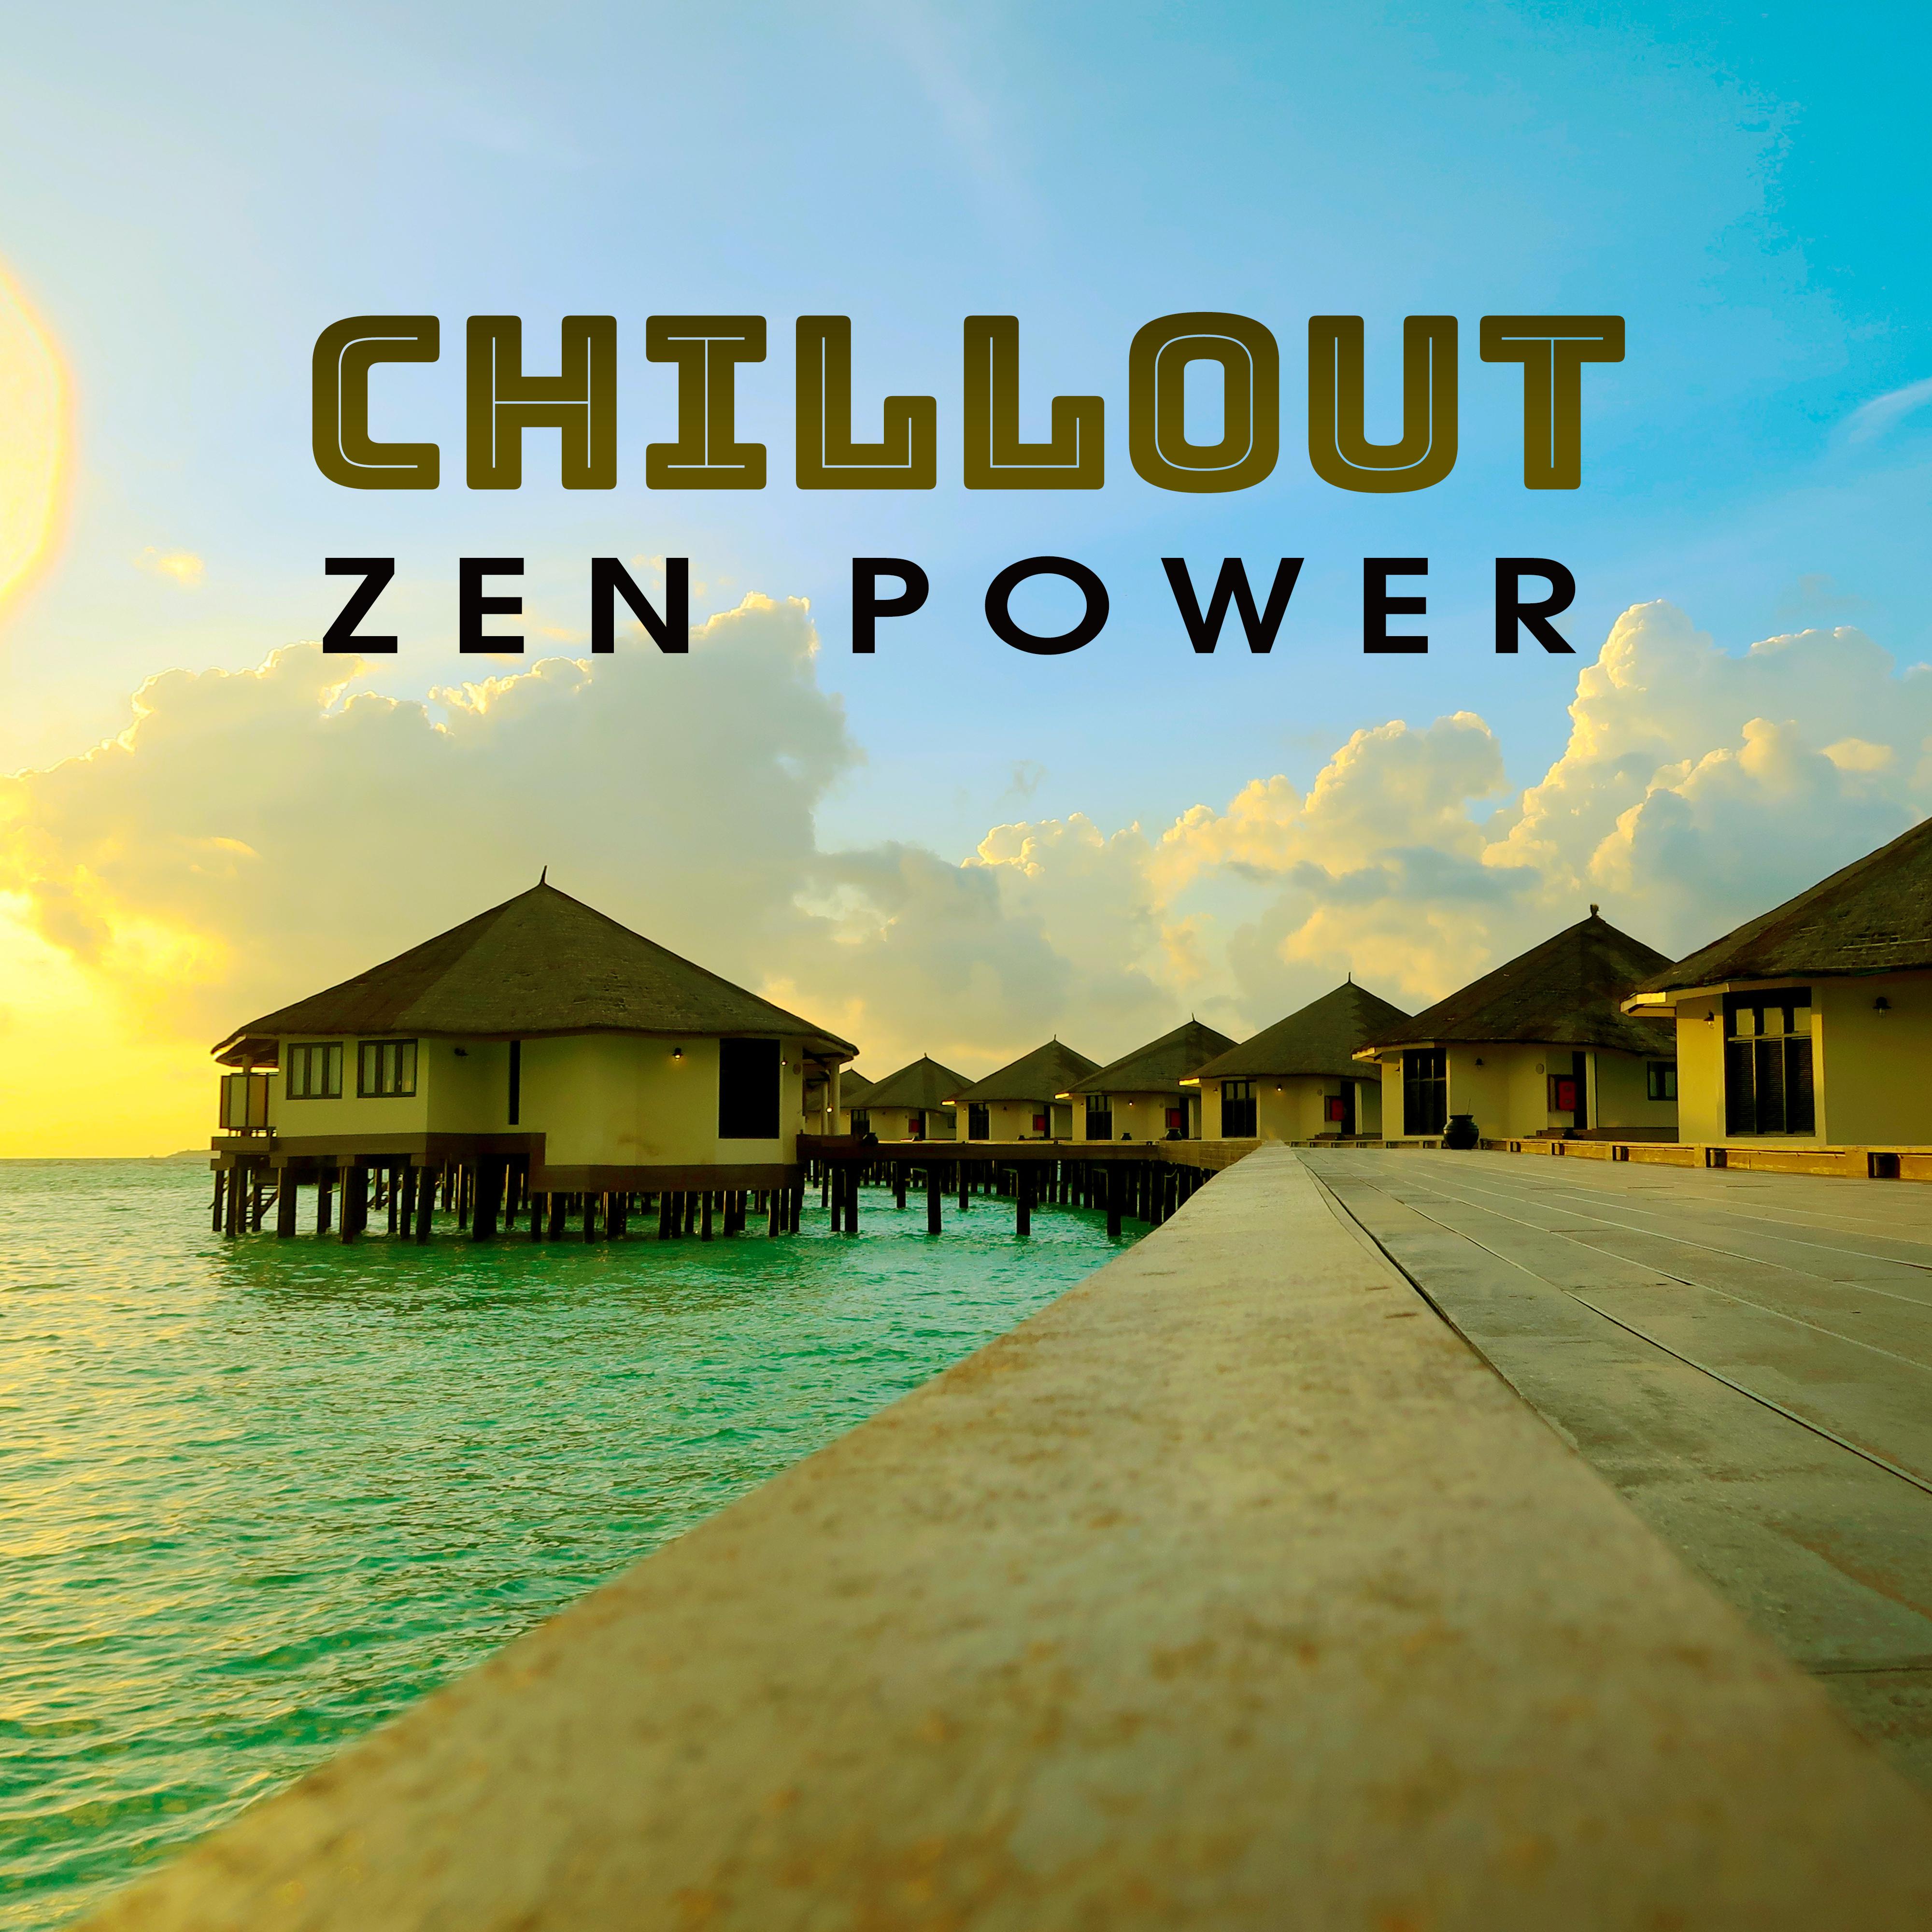 Chillout Zen Power – Peaceful Chillout, Music for Yoga, Meditation, Relaxation, Rest, Godd Vibes Only